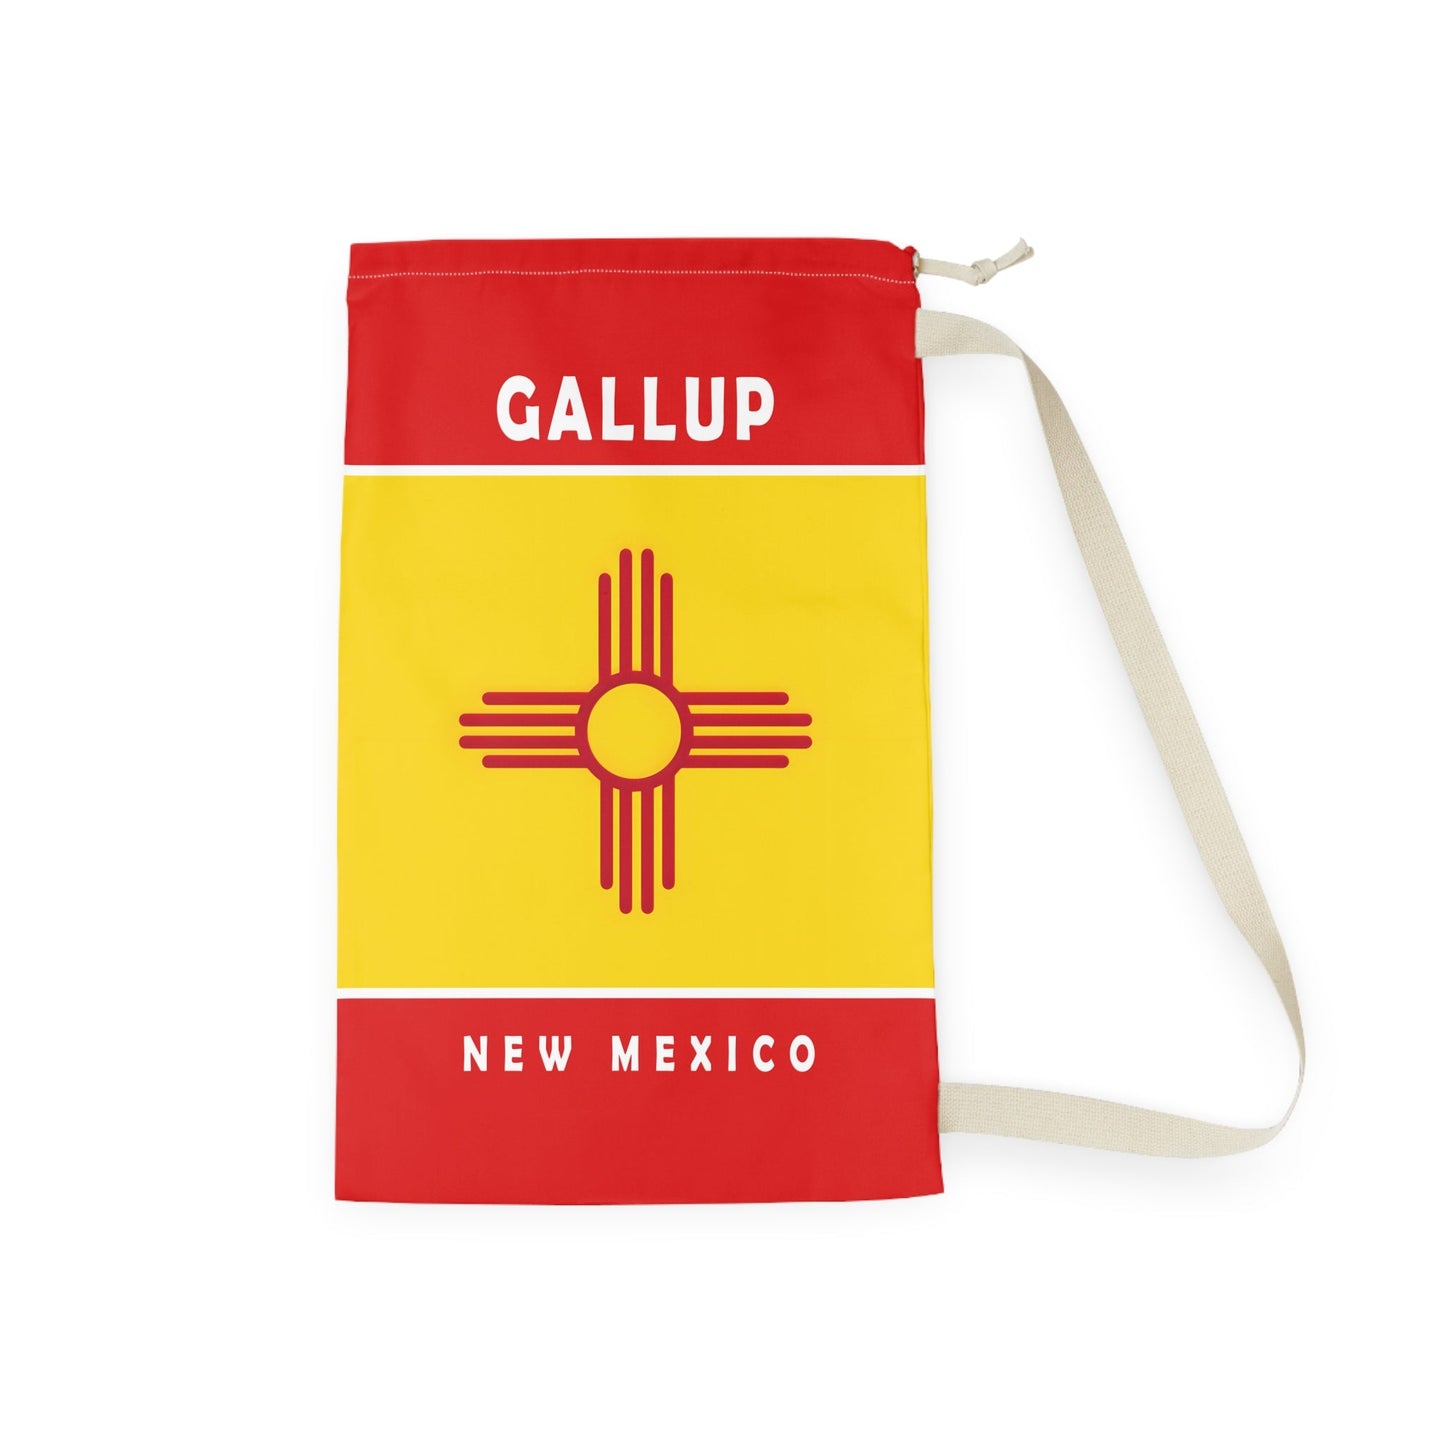 Gallup New Mexico Laundry Bag